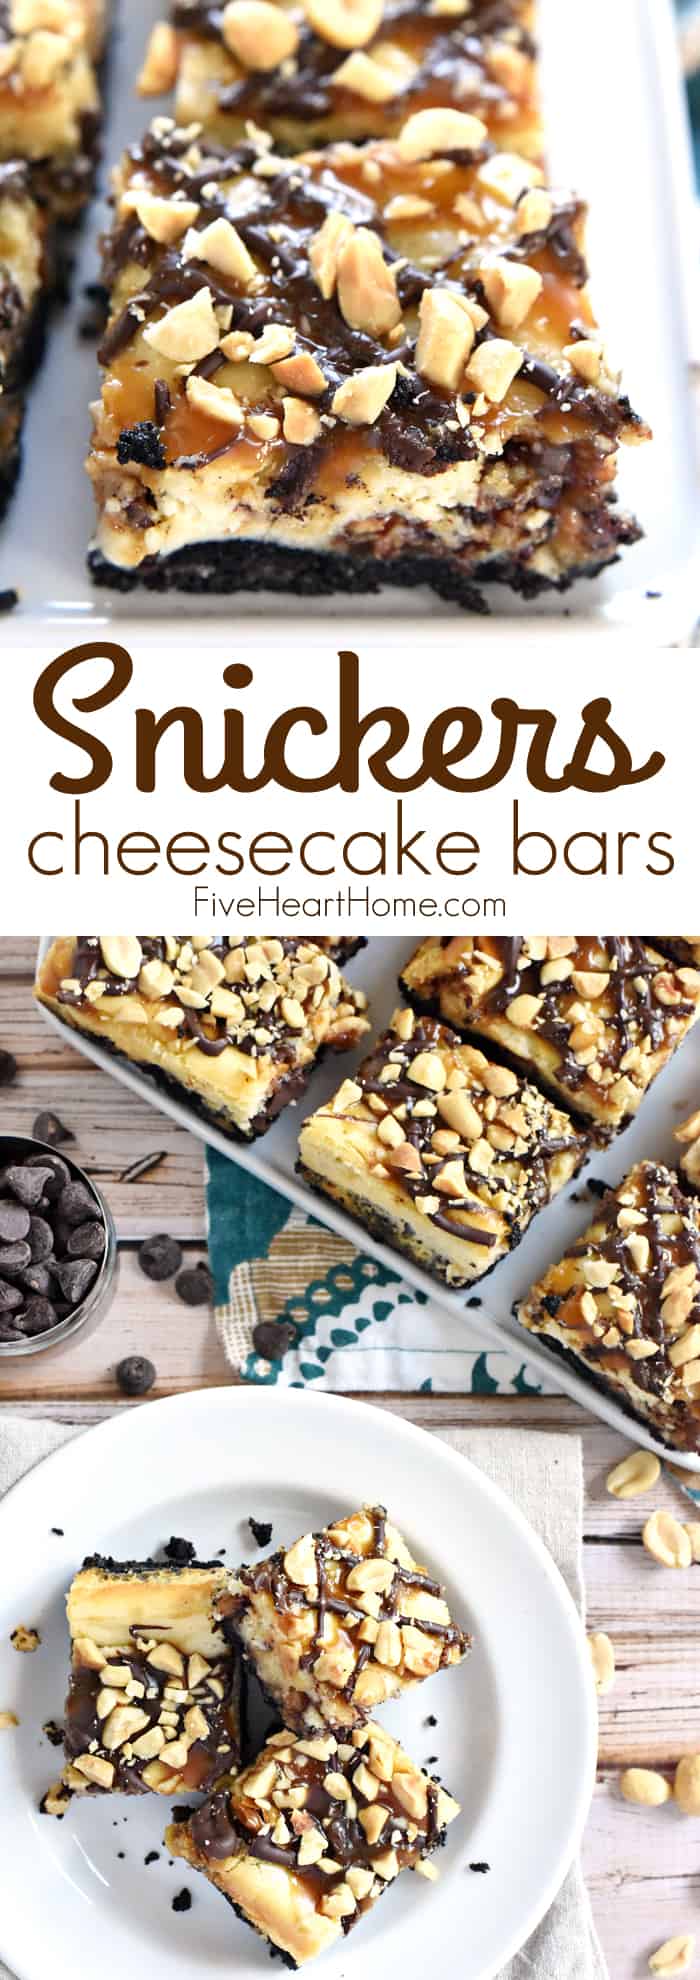 Snickers Cheesecake Bars Collage with Text Overlay 